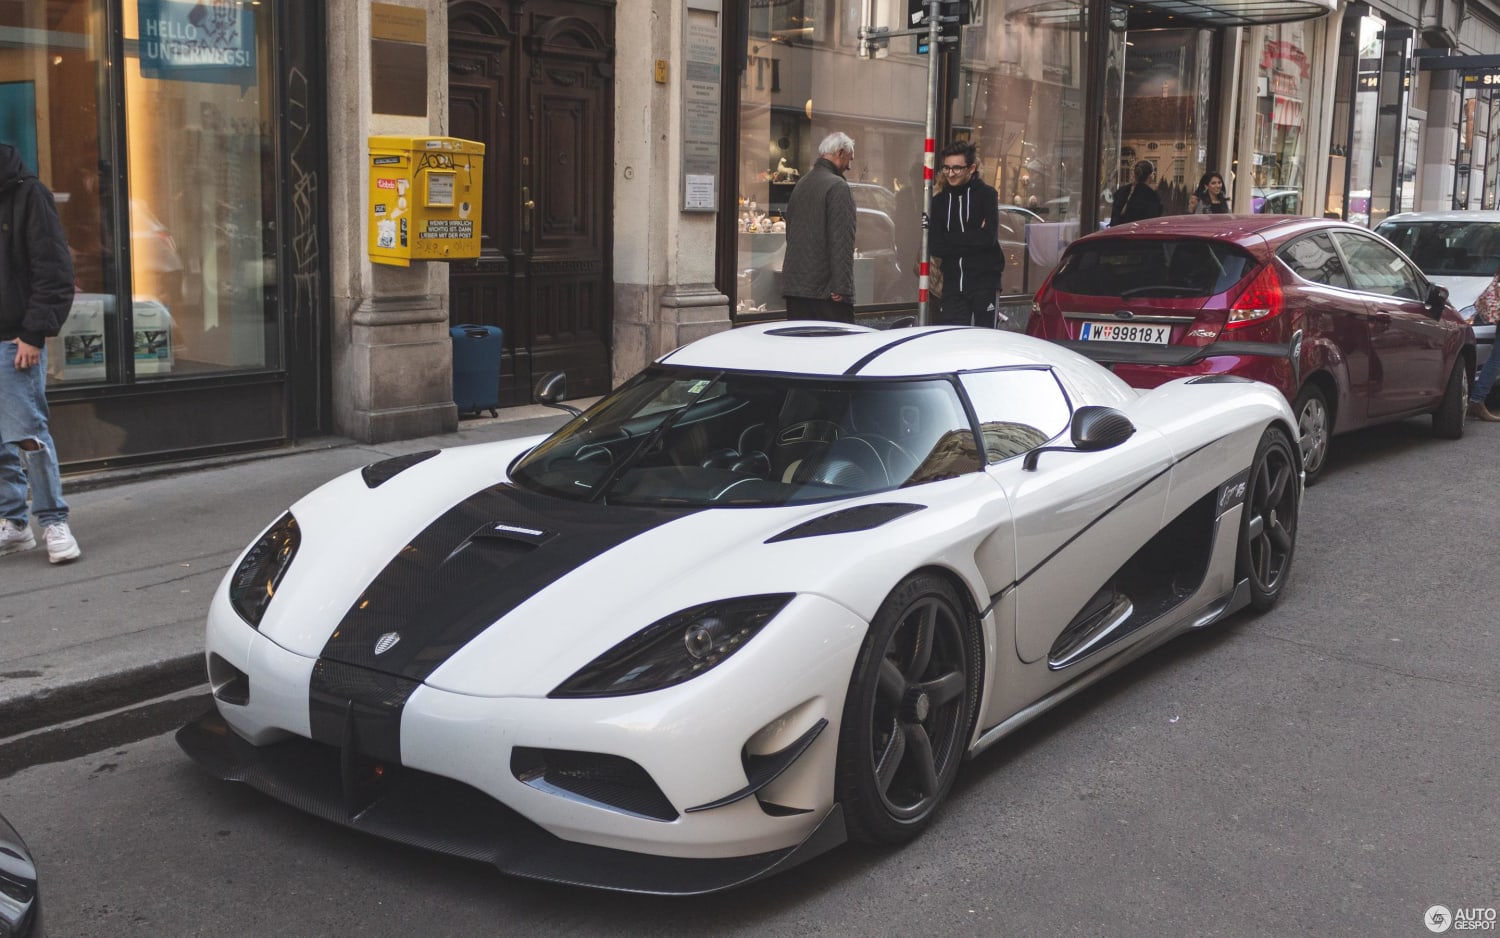 learned about this car from nfs and fell in love with it! the Koenigsegg Agera RS